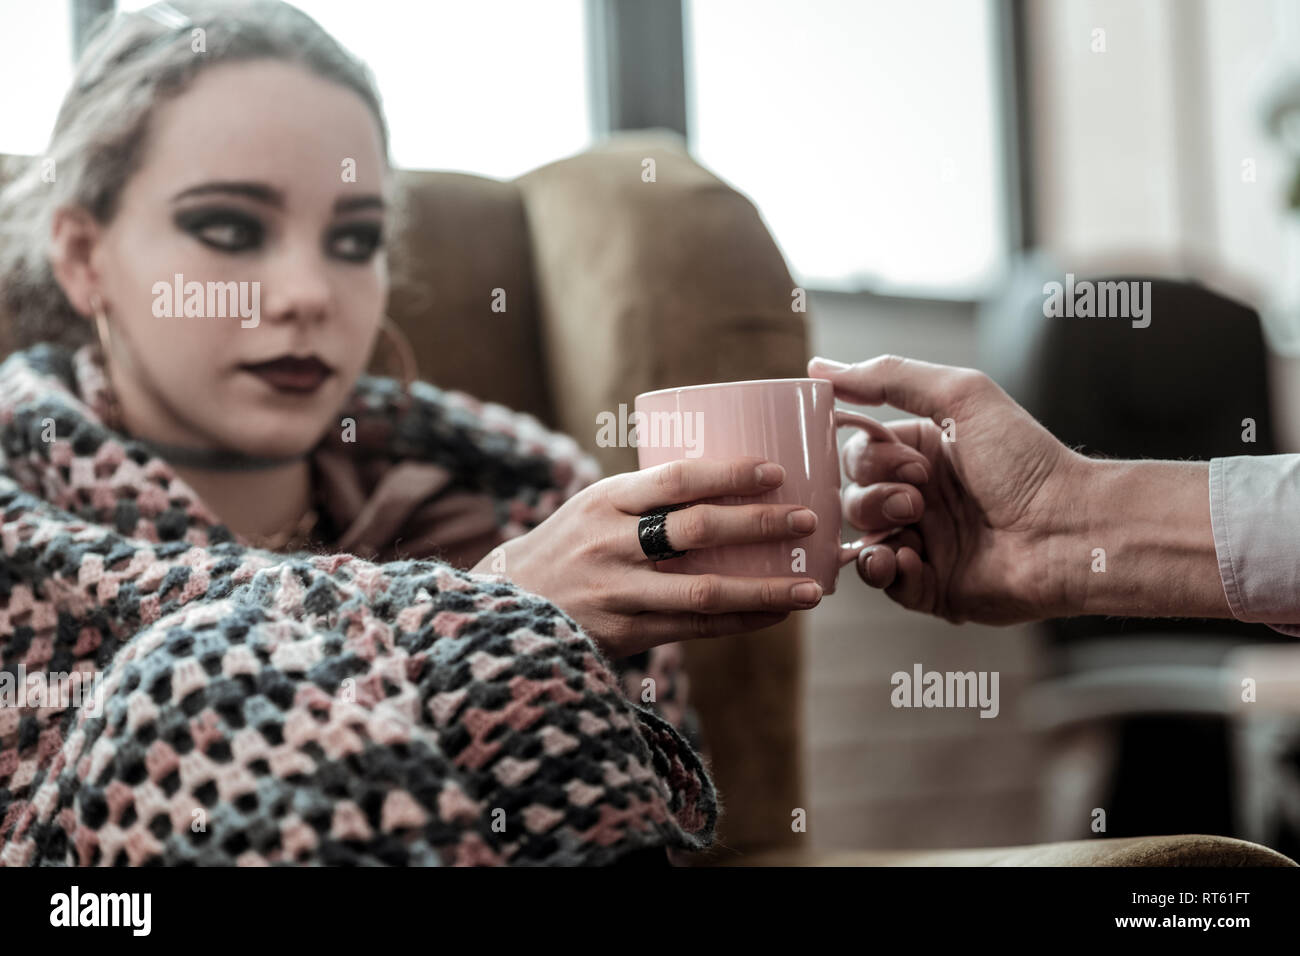 Pink cup. Teenage daughter with smoky eyes taking pink cup of tea from caring father Stock Photo